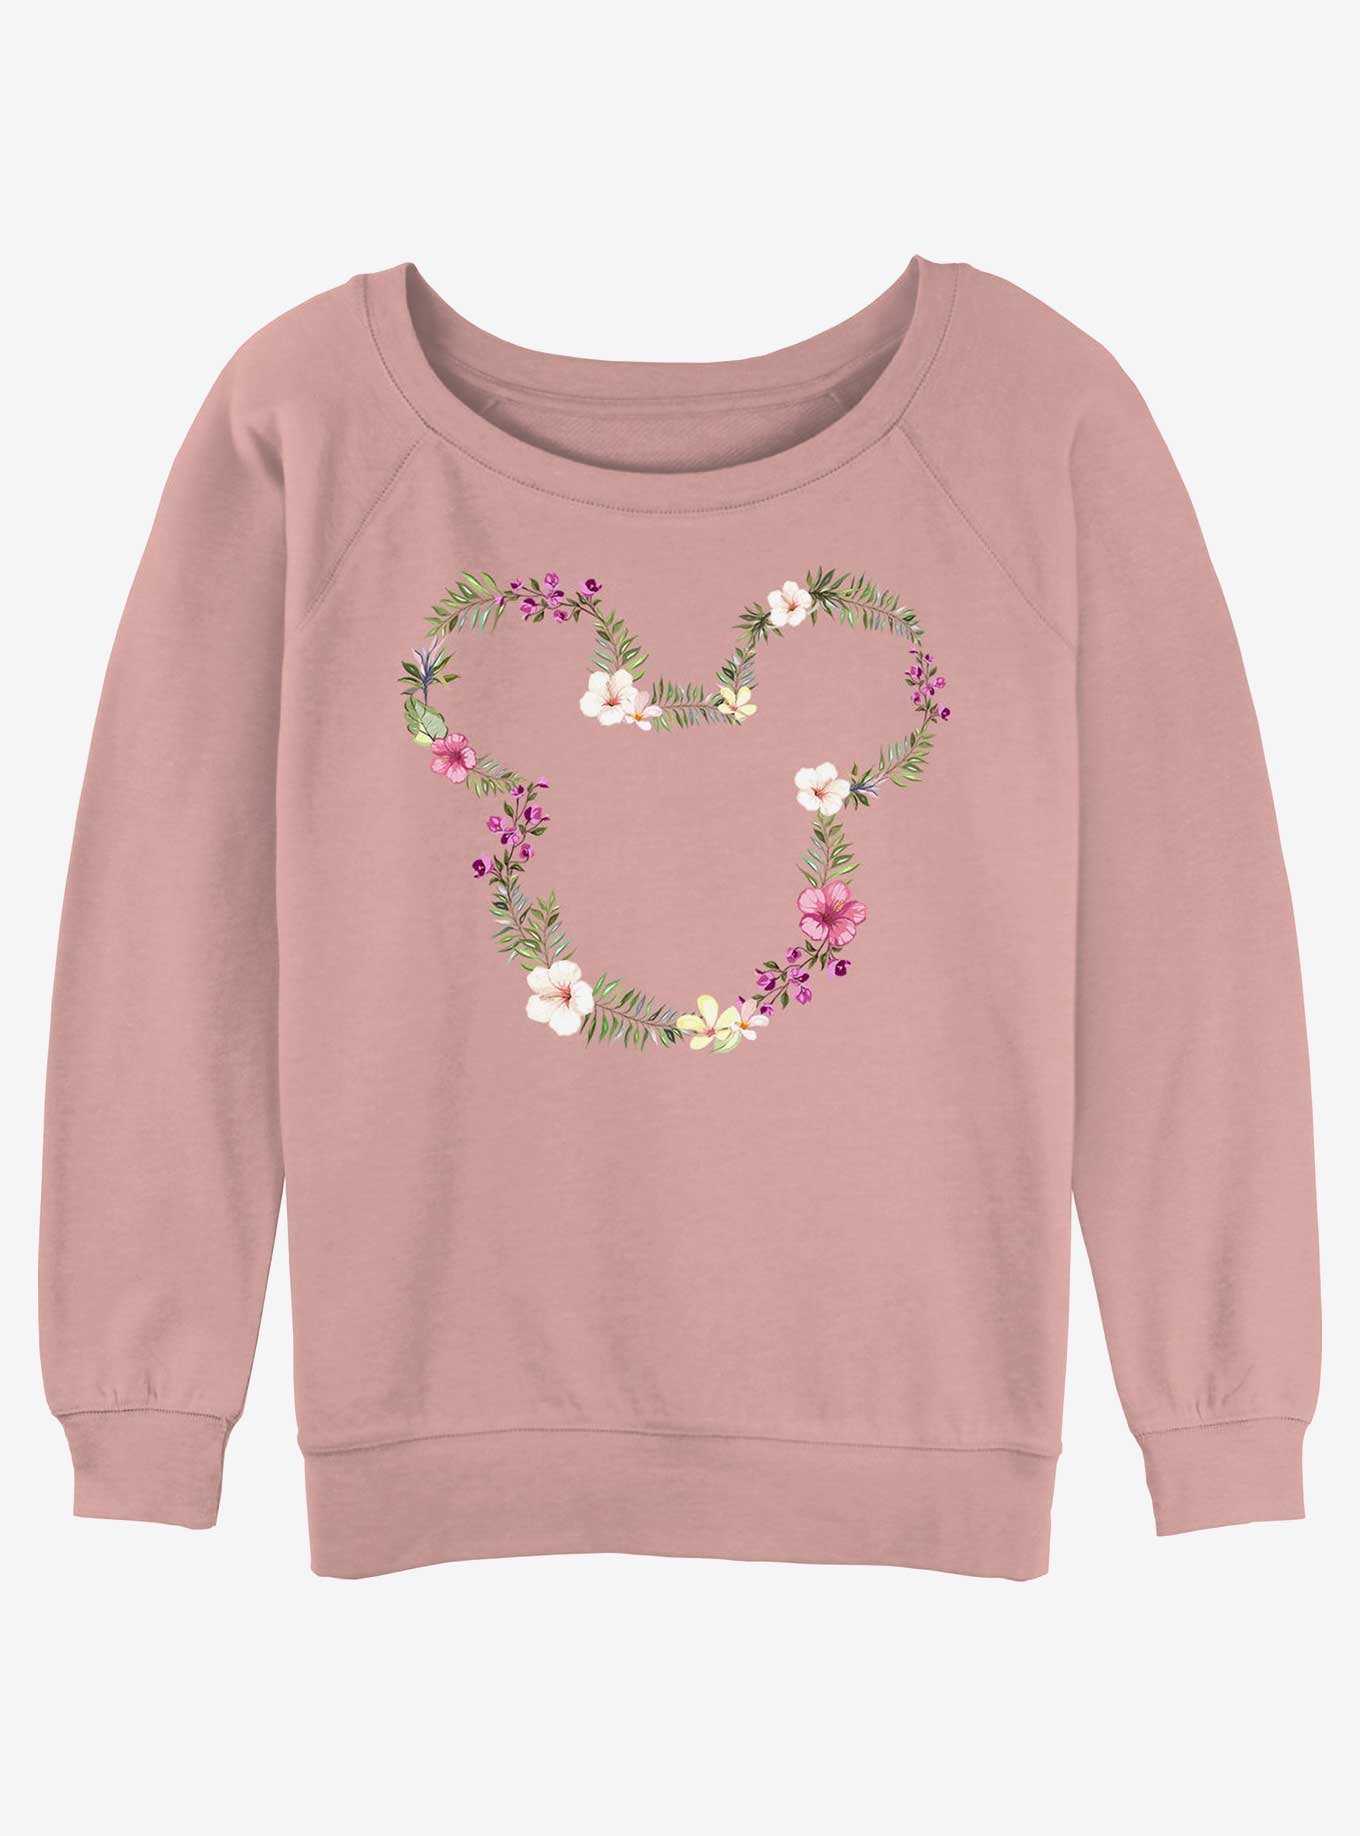 Disney Mickey Mouse Floral Mickey Womens Slouchy Sweatshirt, , hi-res